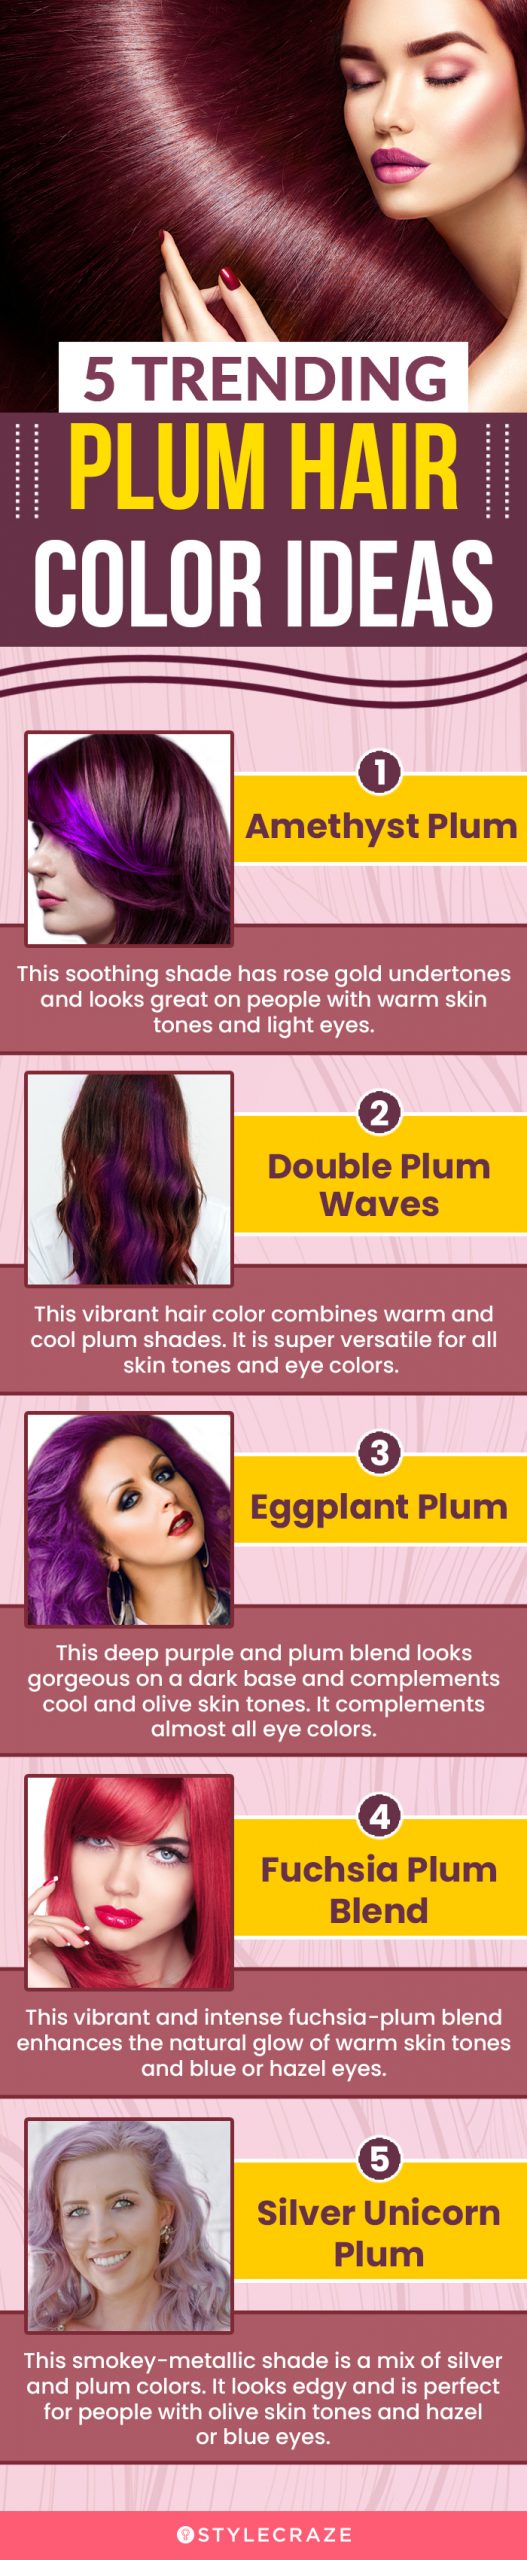 plum red hair color